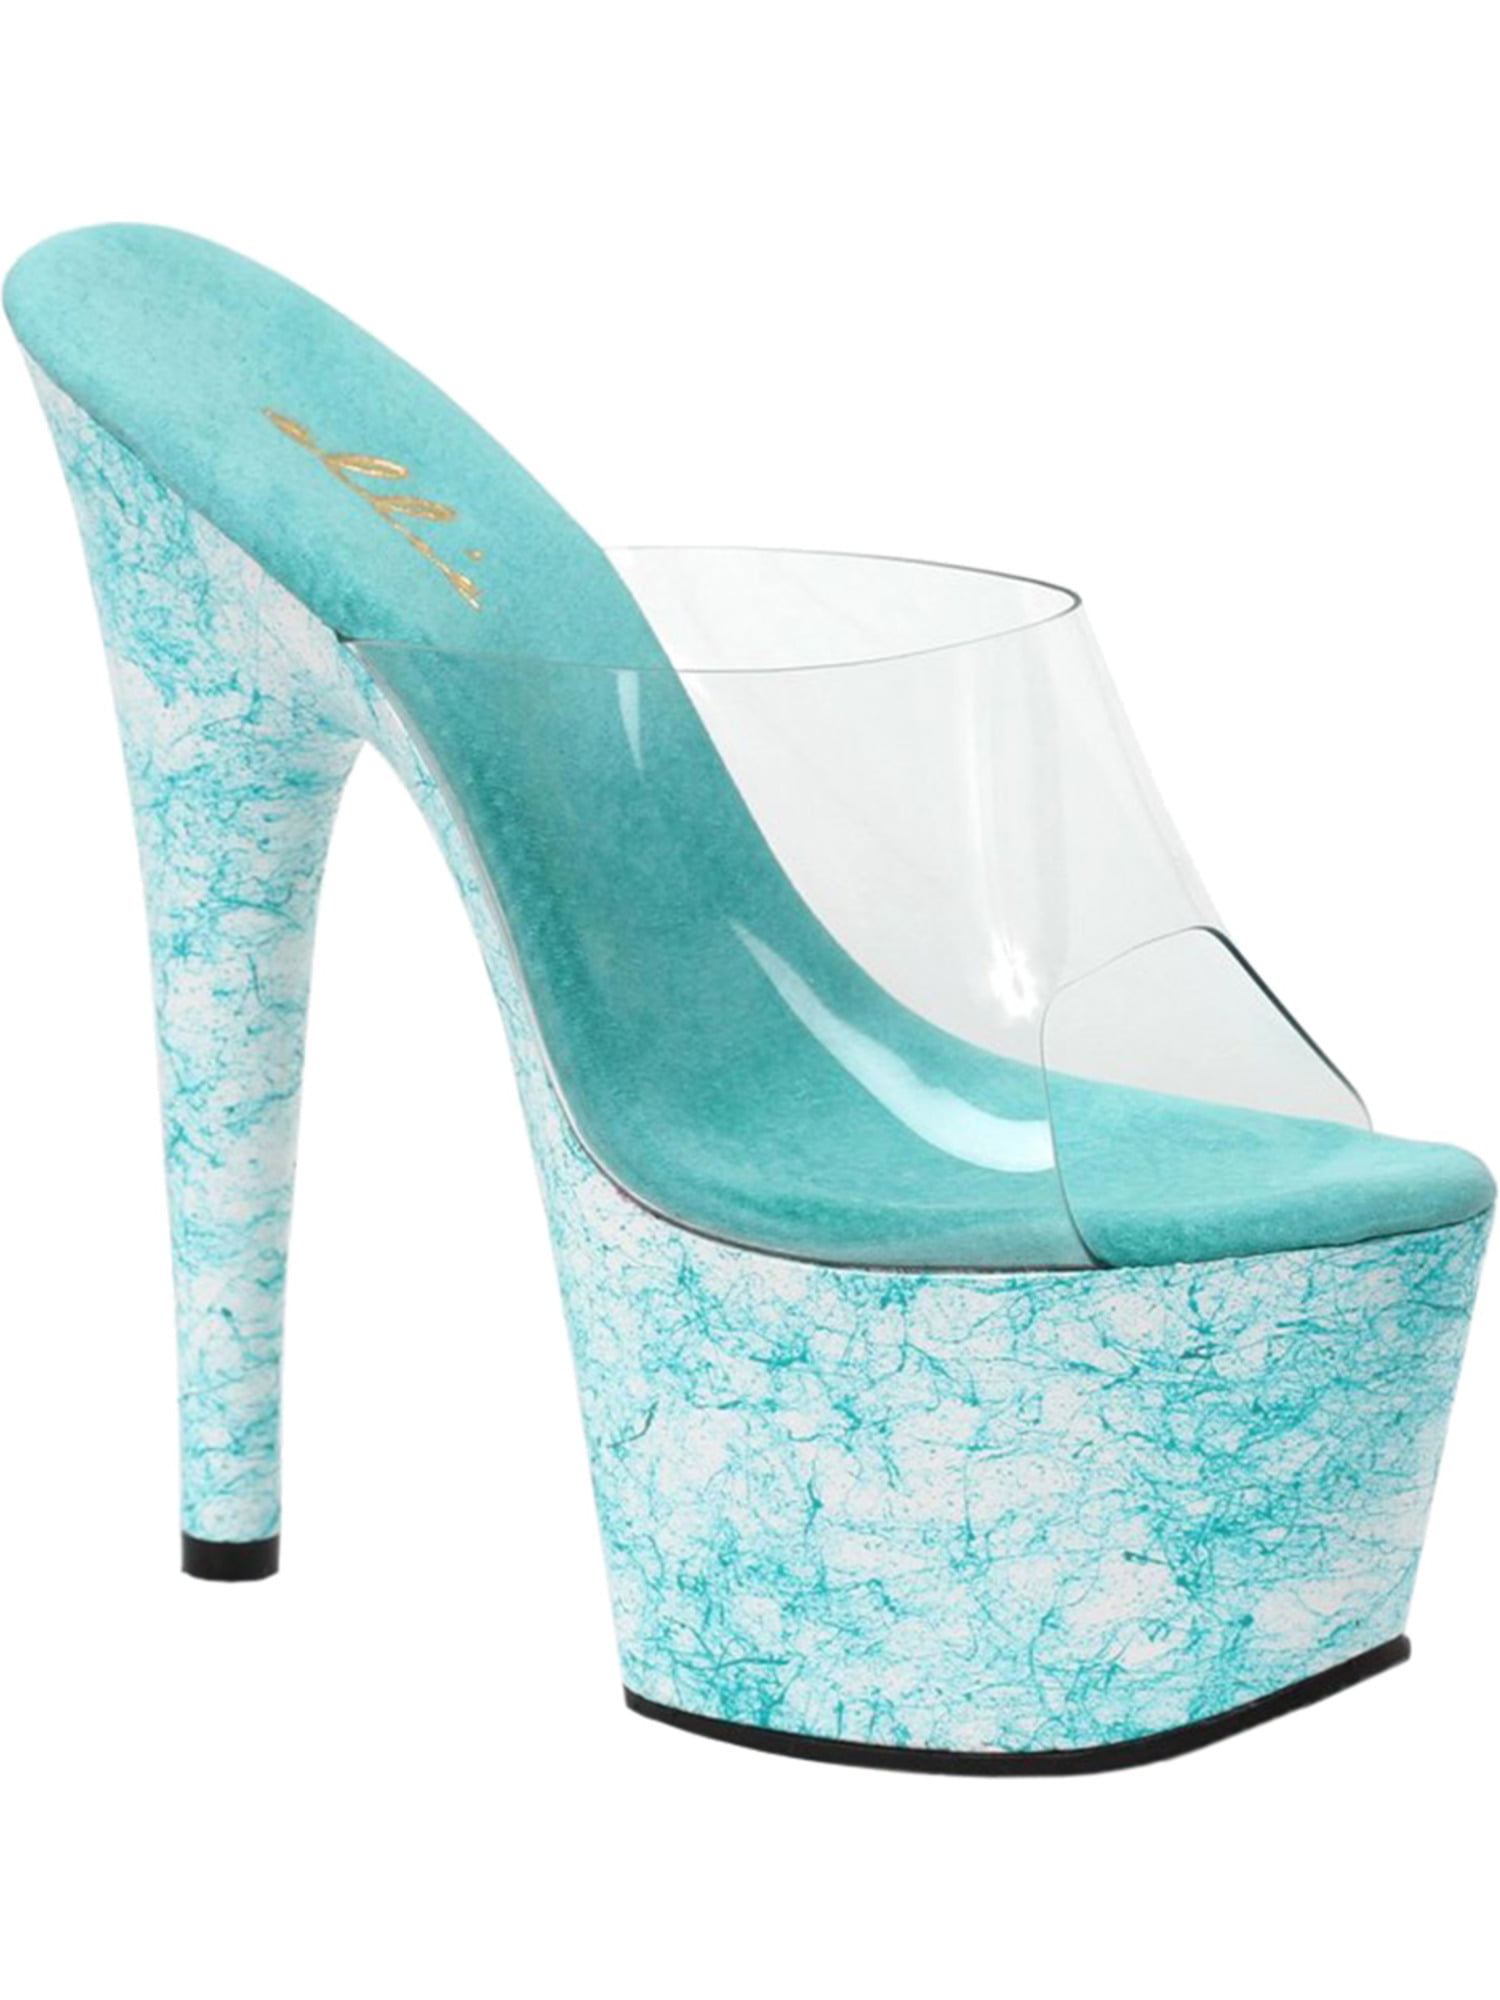 White and Light Blue Heels 